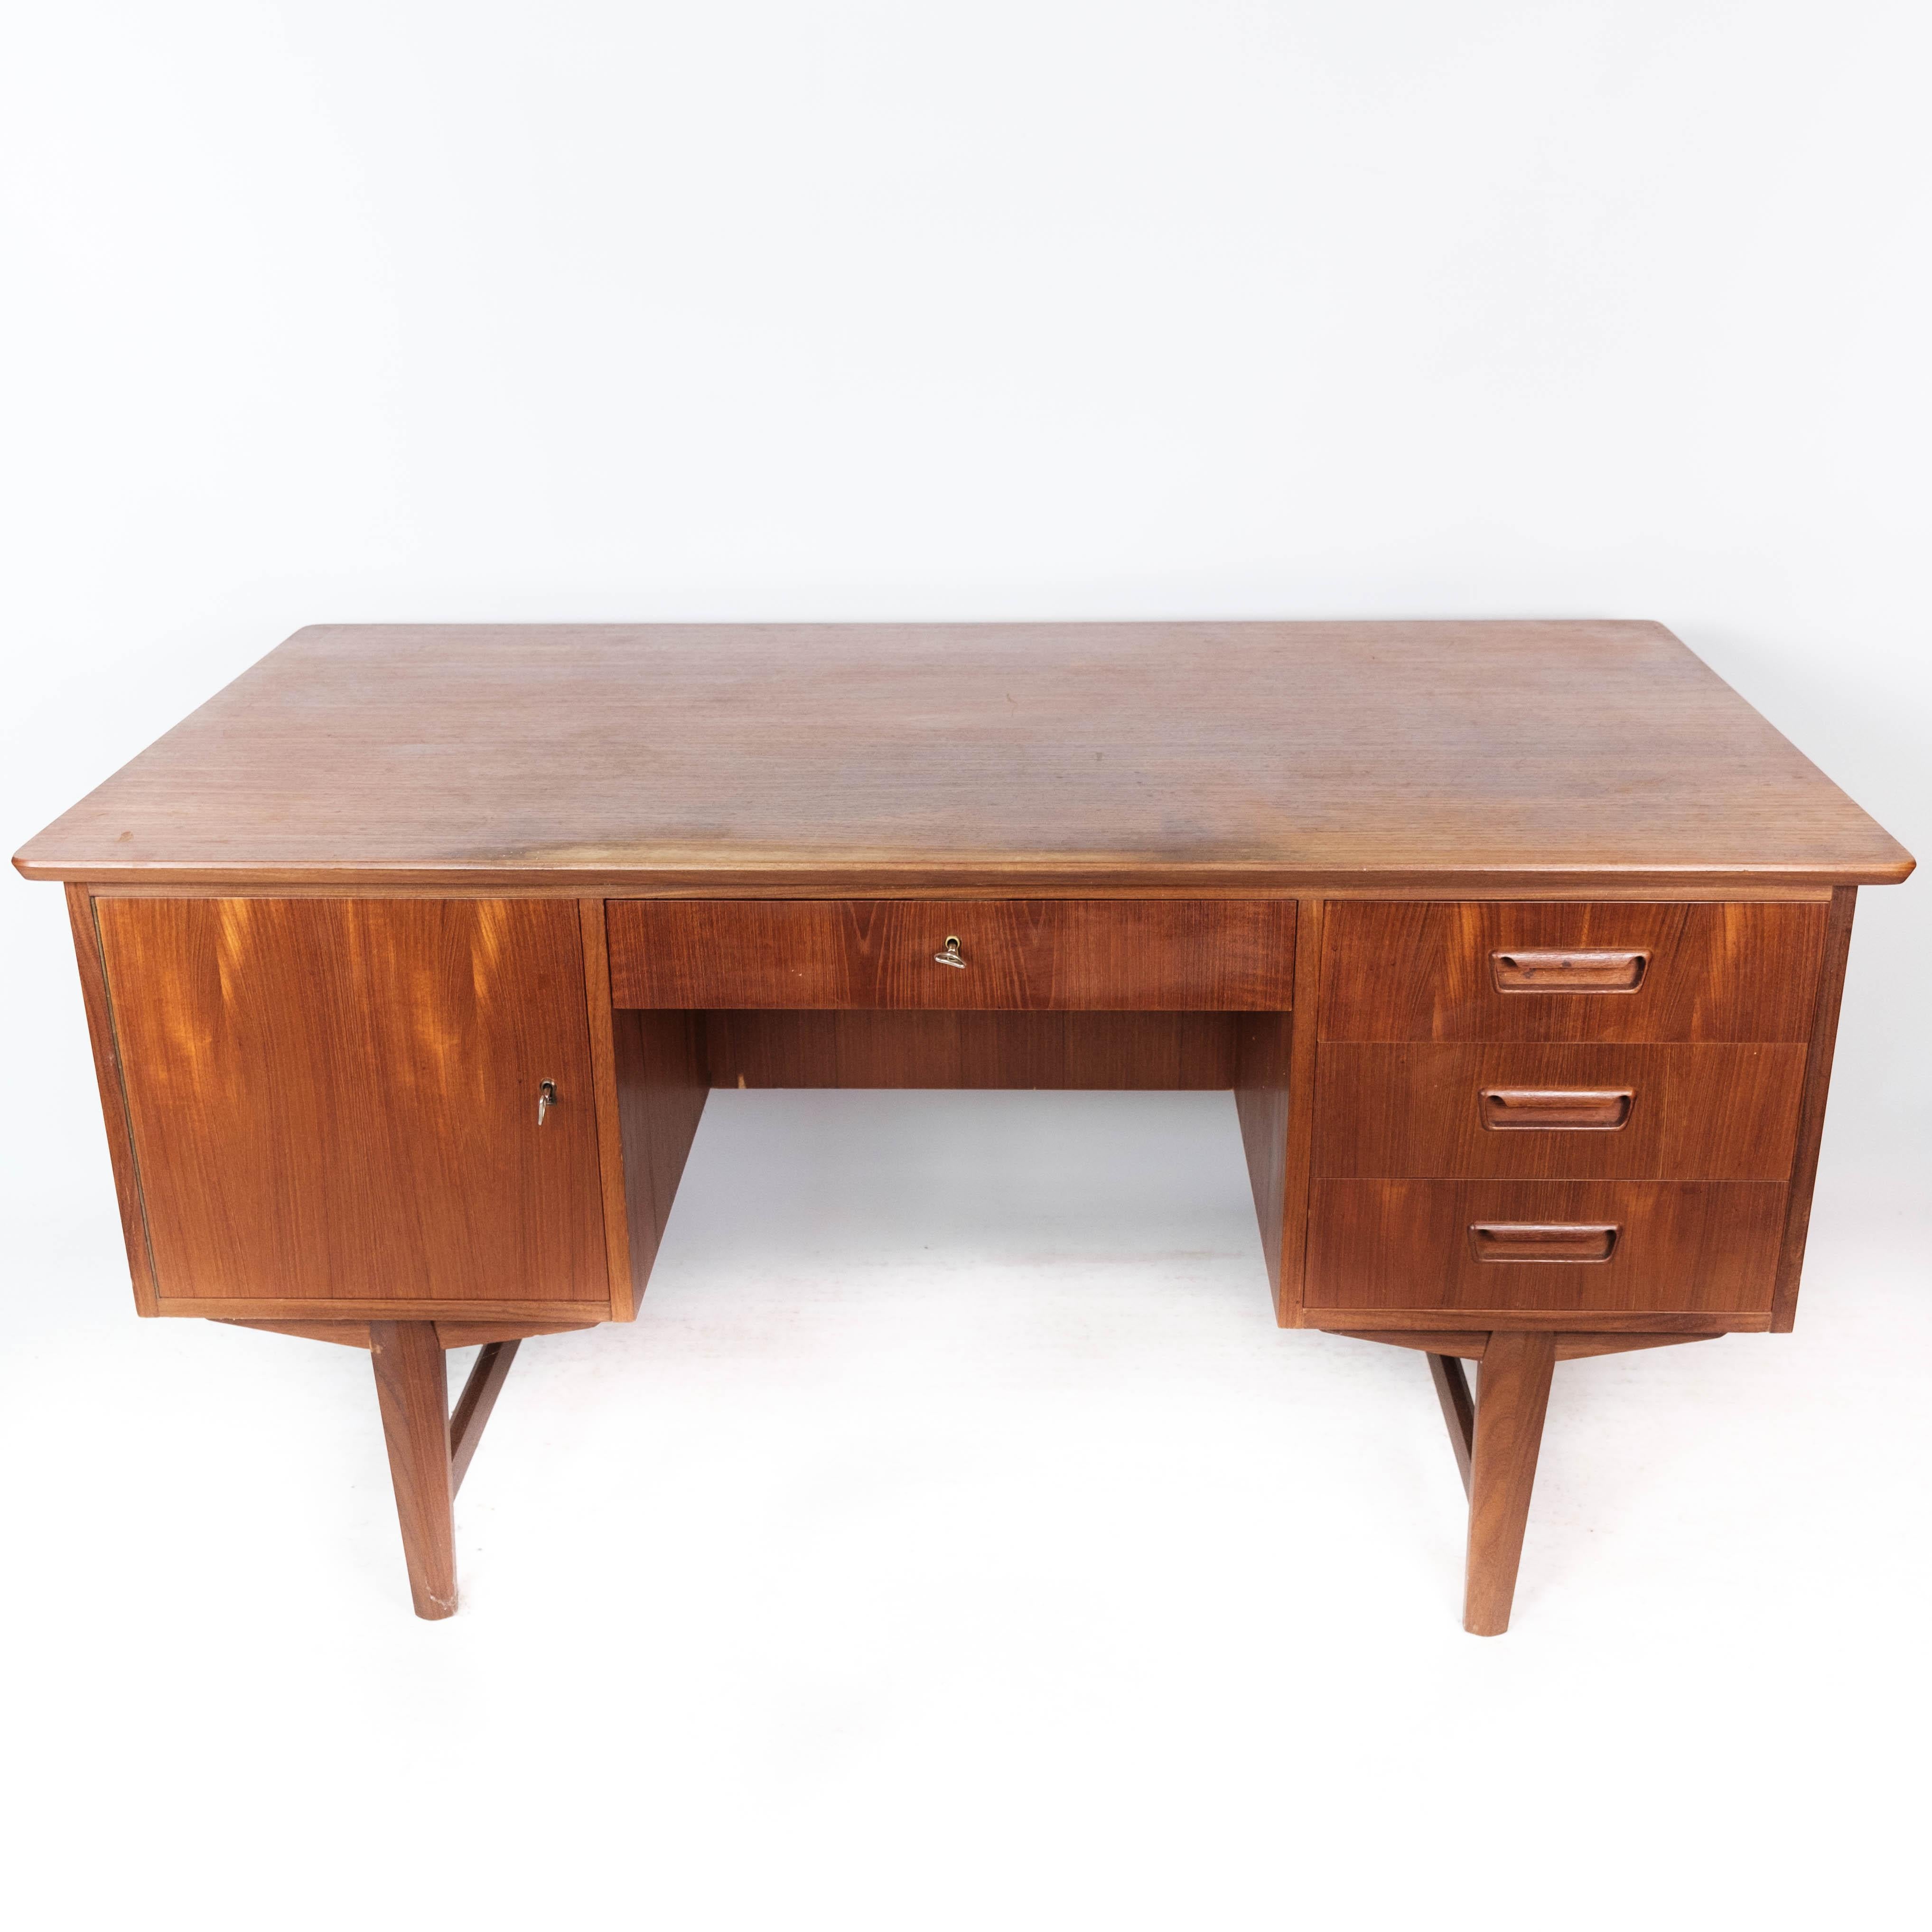 Desk in teak of Danish design from the 1960s. The table is in great vintage condition.